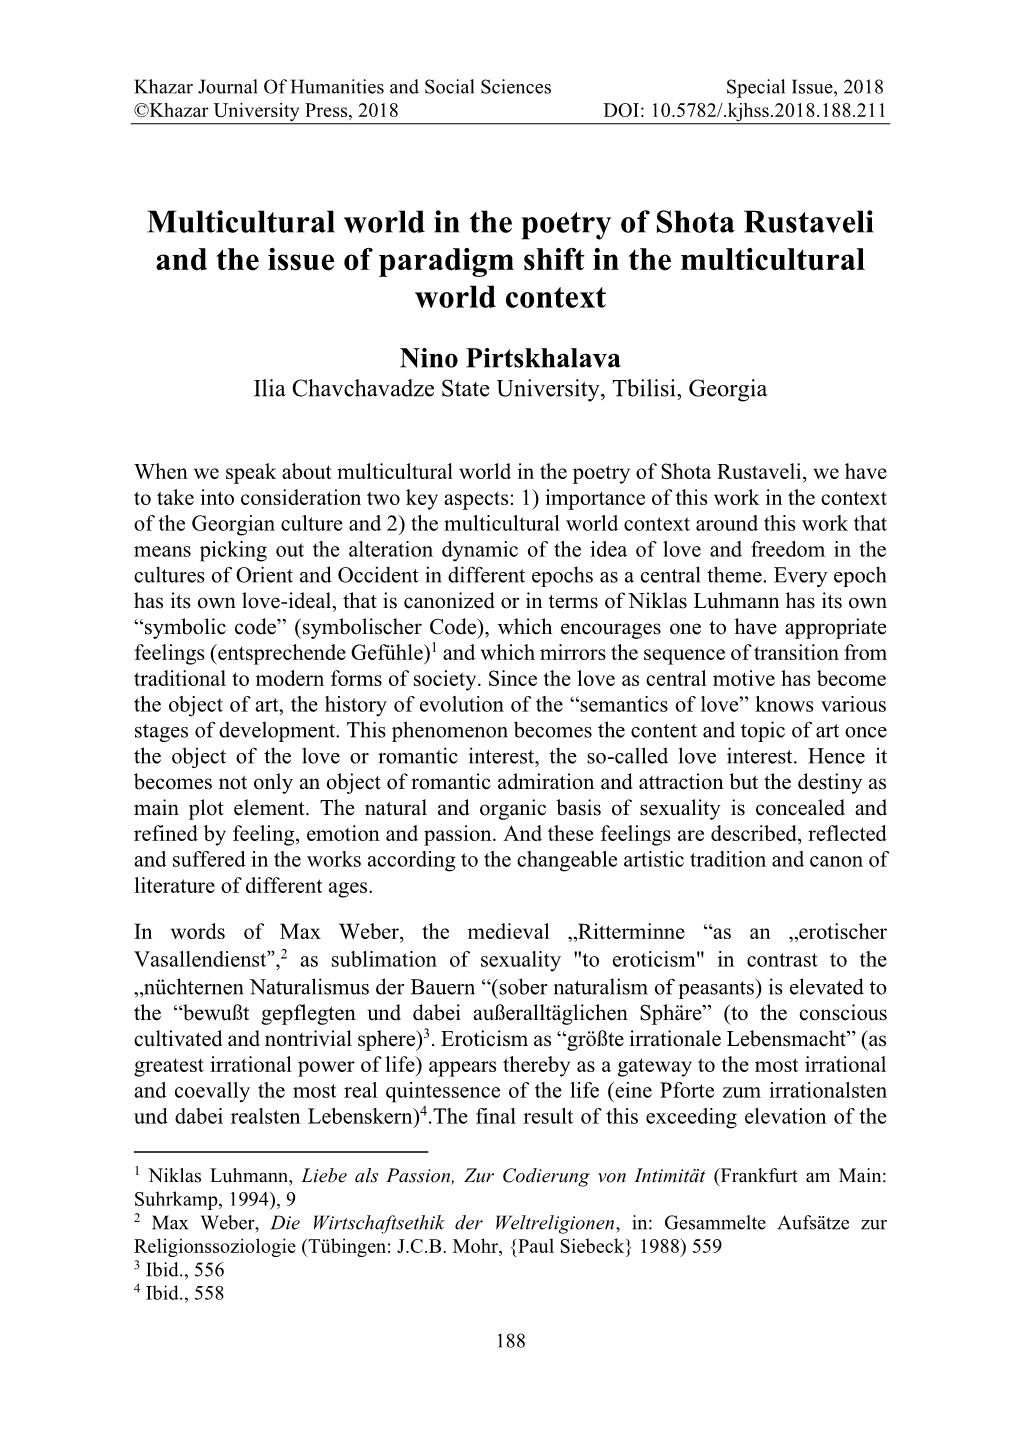 Multicultural World in the Poetry of Shota Rustaveli and the Issue of Paradigm Shift in the Multicultural World Context